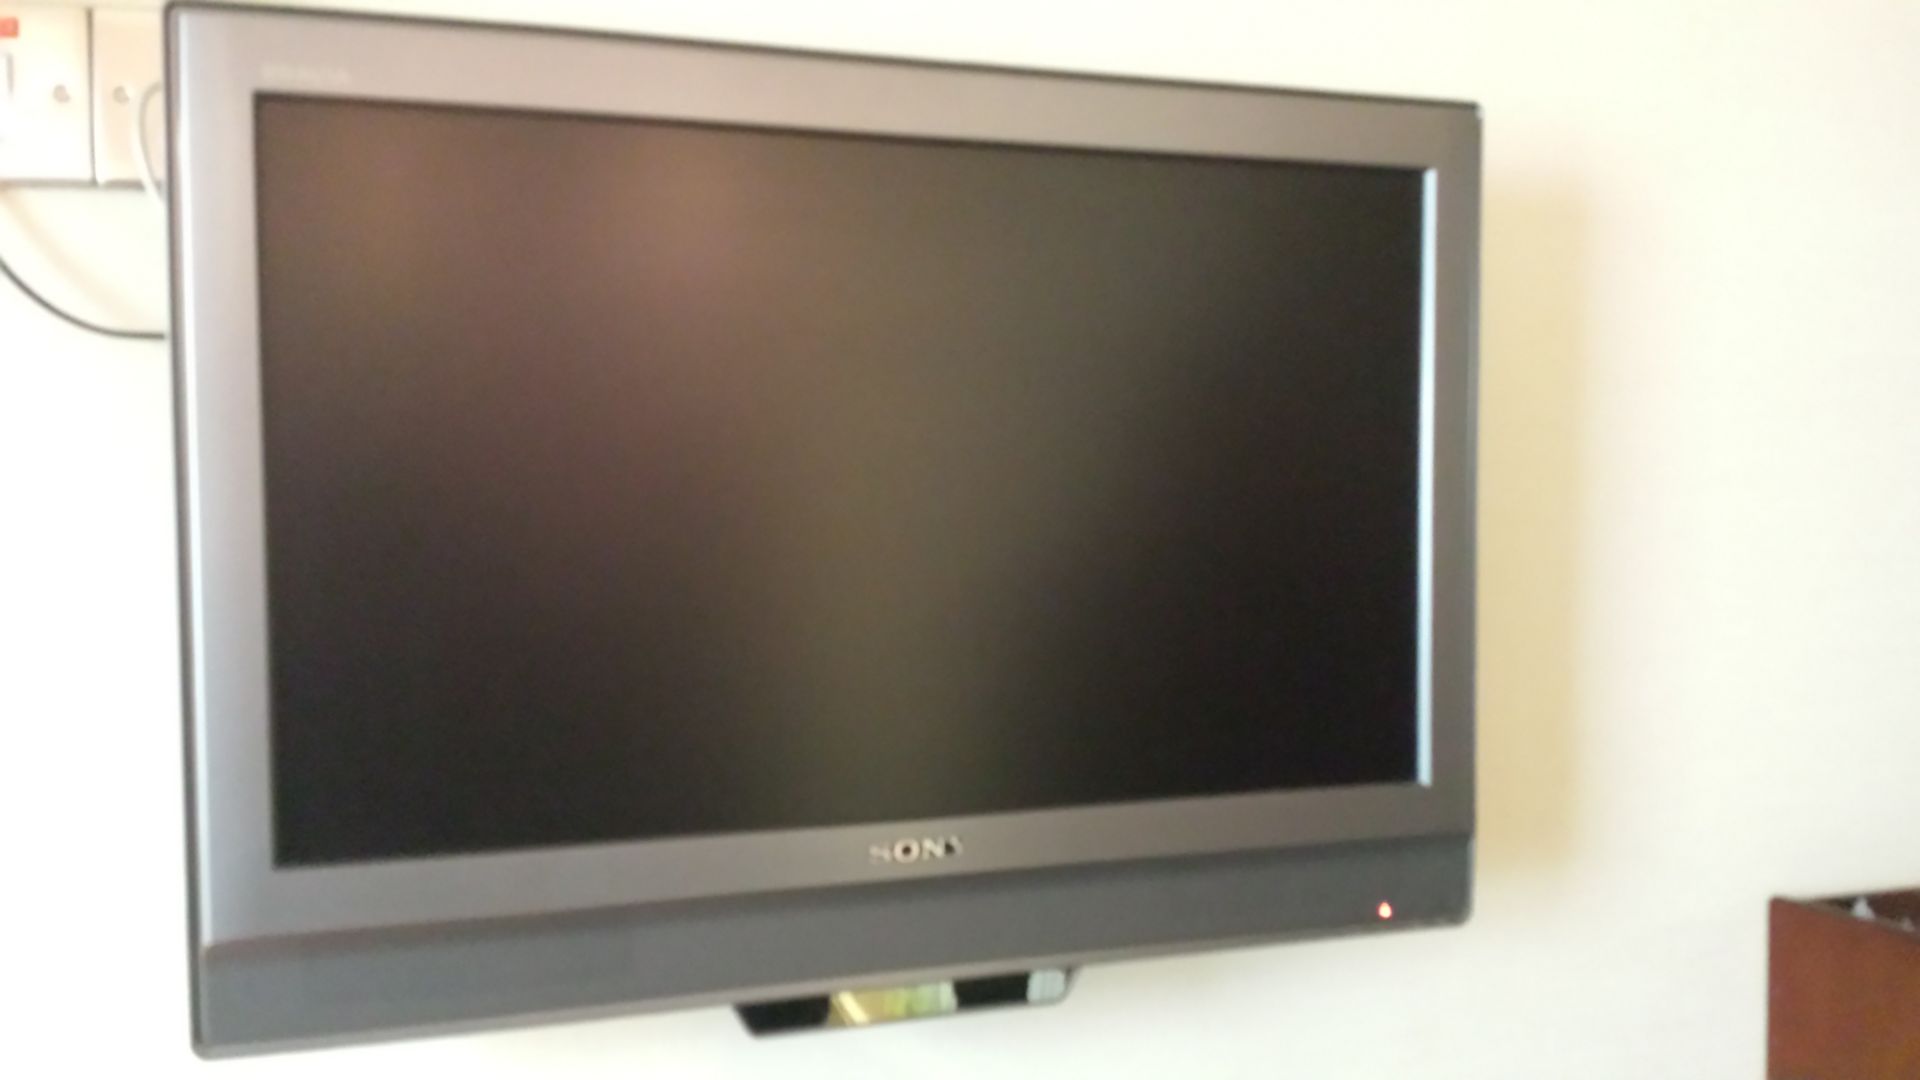 Sony Flat Screen TV with remote control - Image 2 of 2